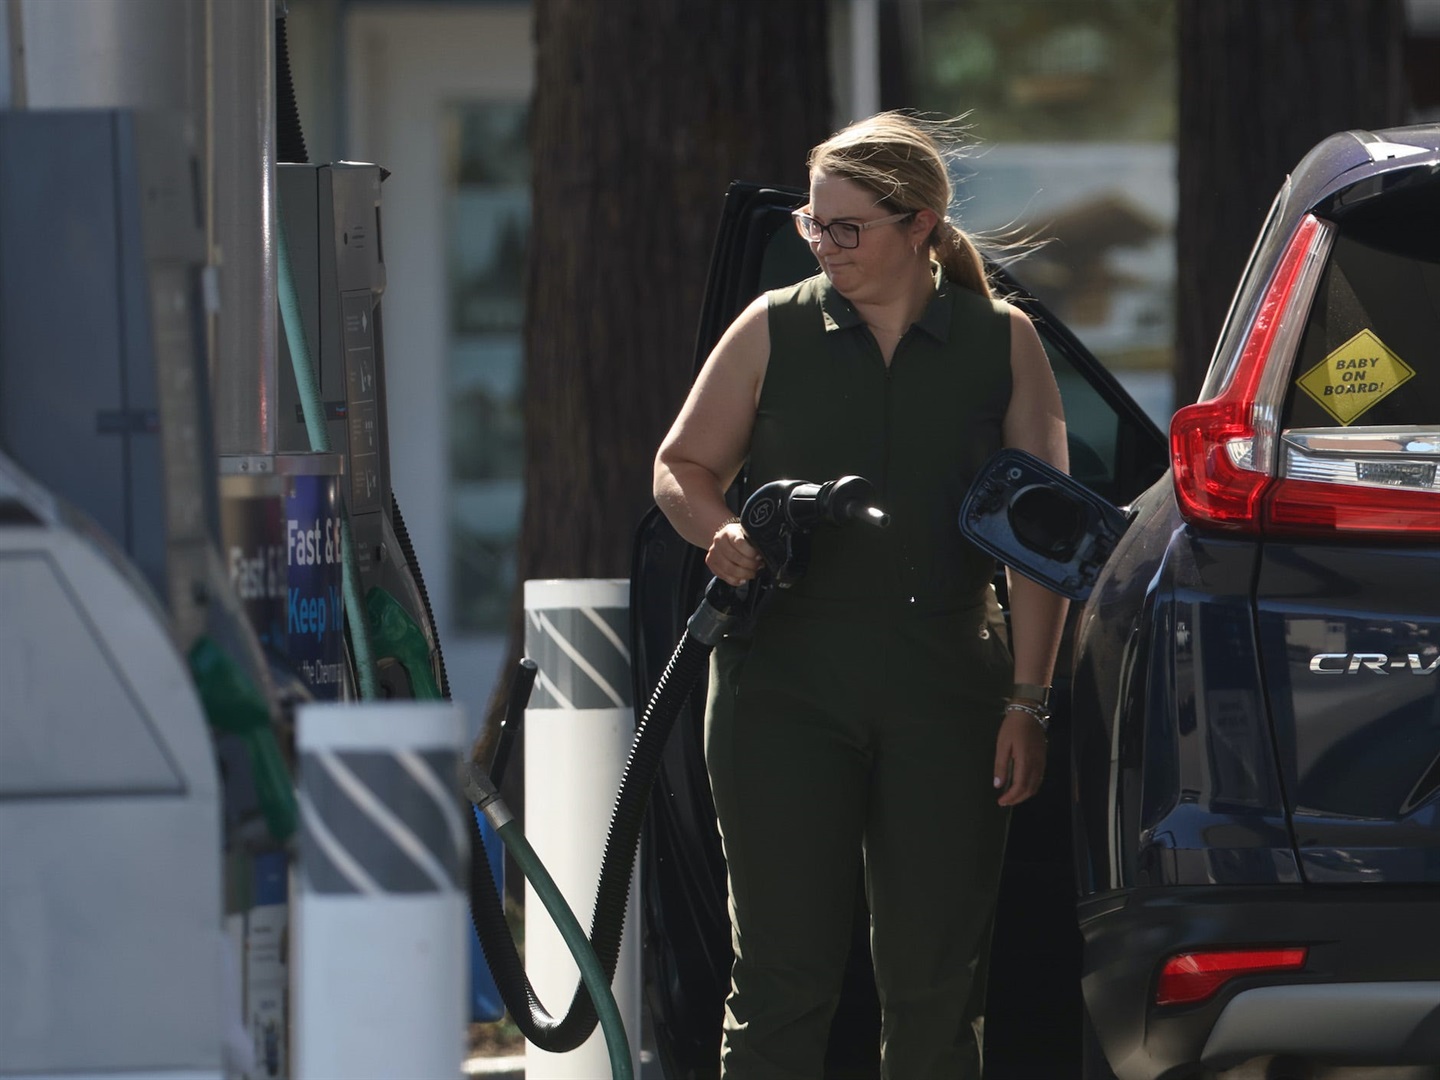 A woman putting petrol into a car at a forecourt station.